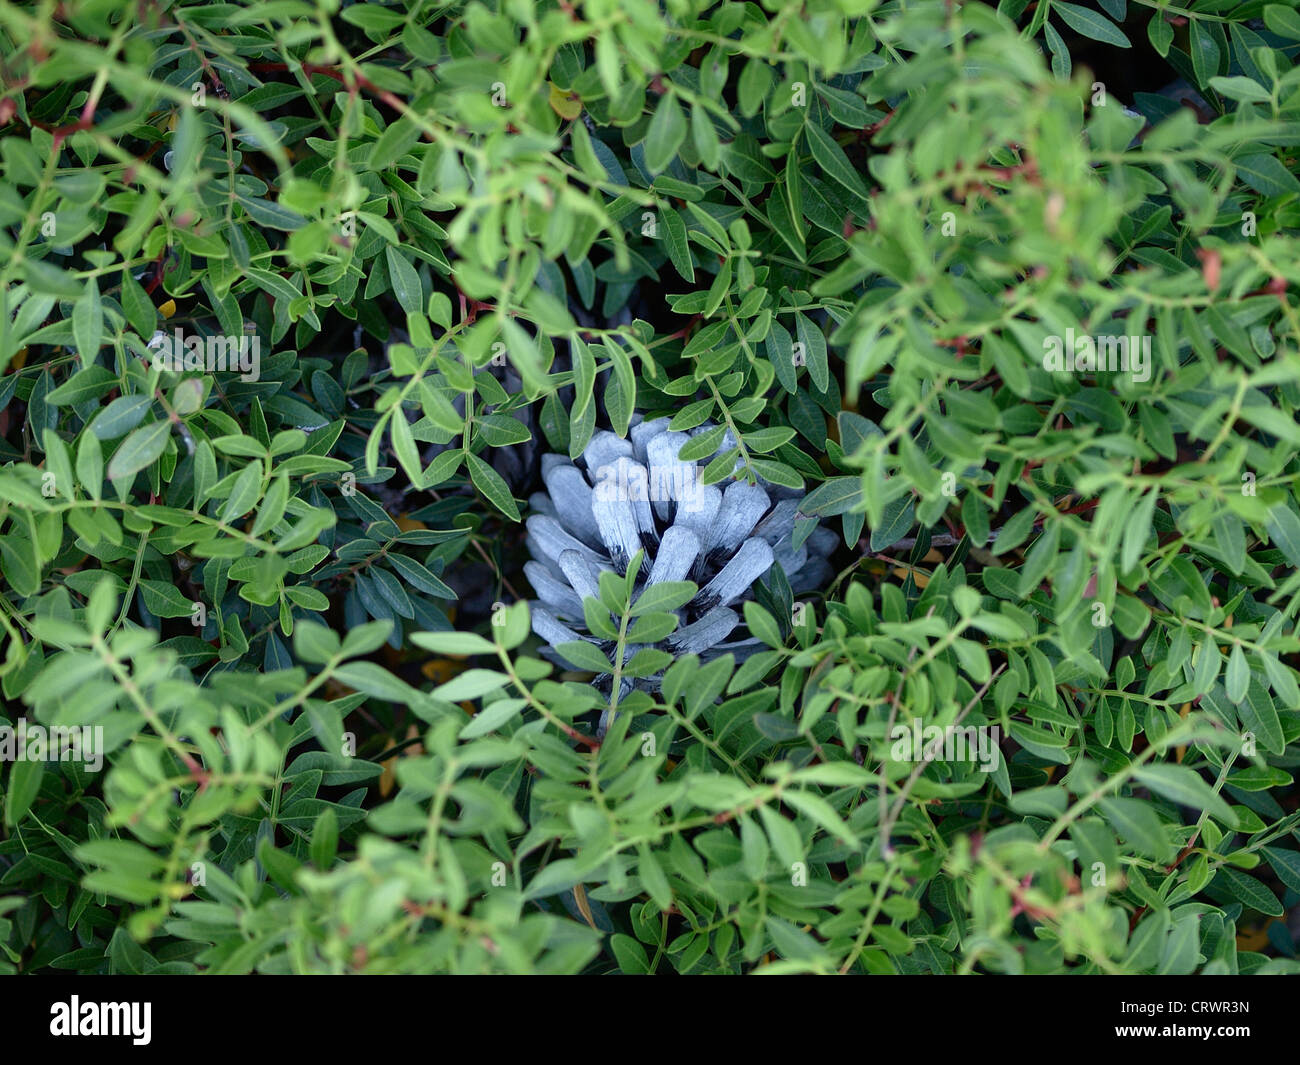 An open white pine cone on the ground hidden among bushes Stock Photo